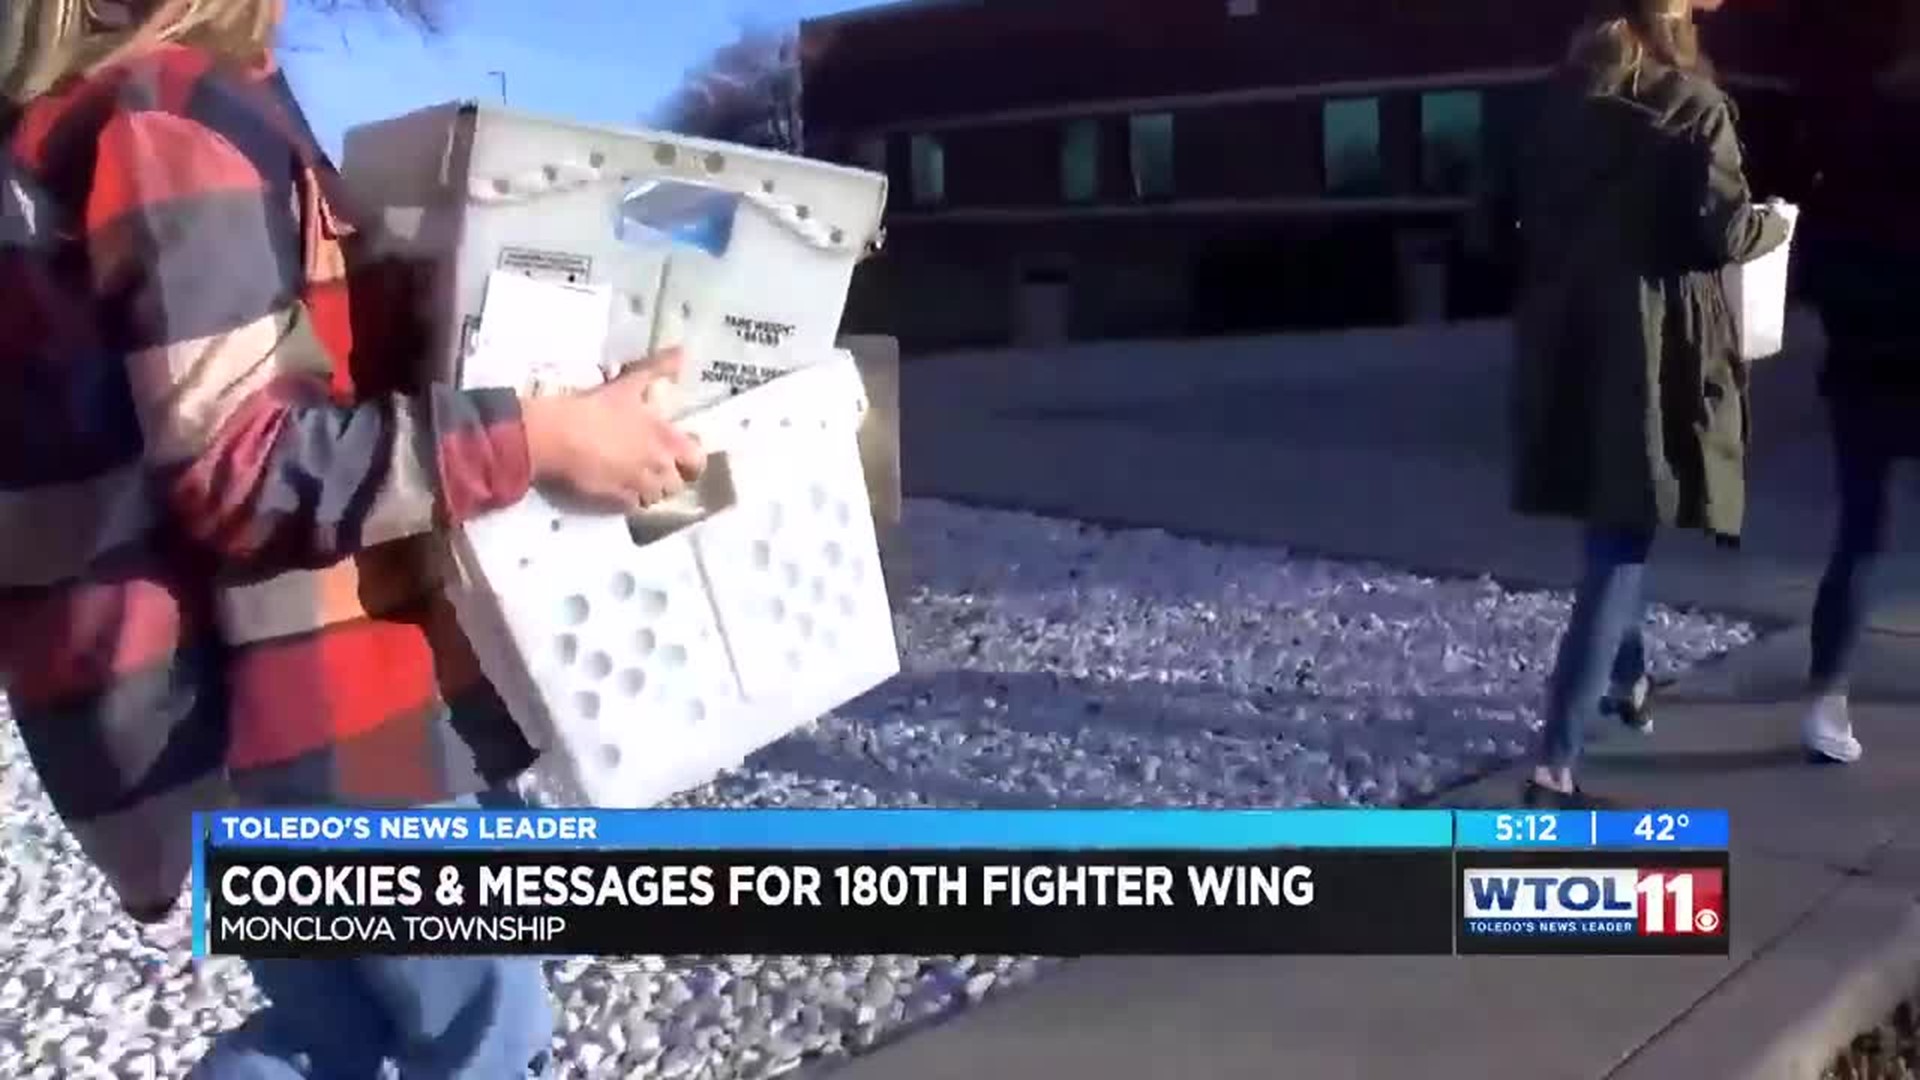 Local schools donate cookies to members of 180th Fighter Wing